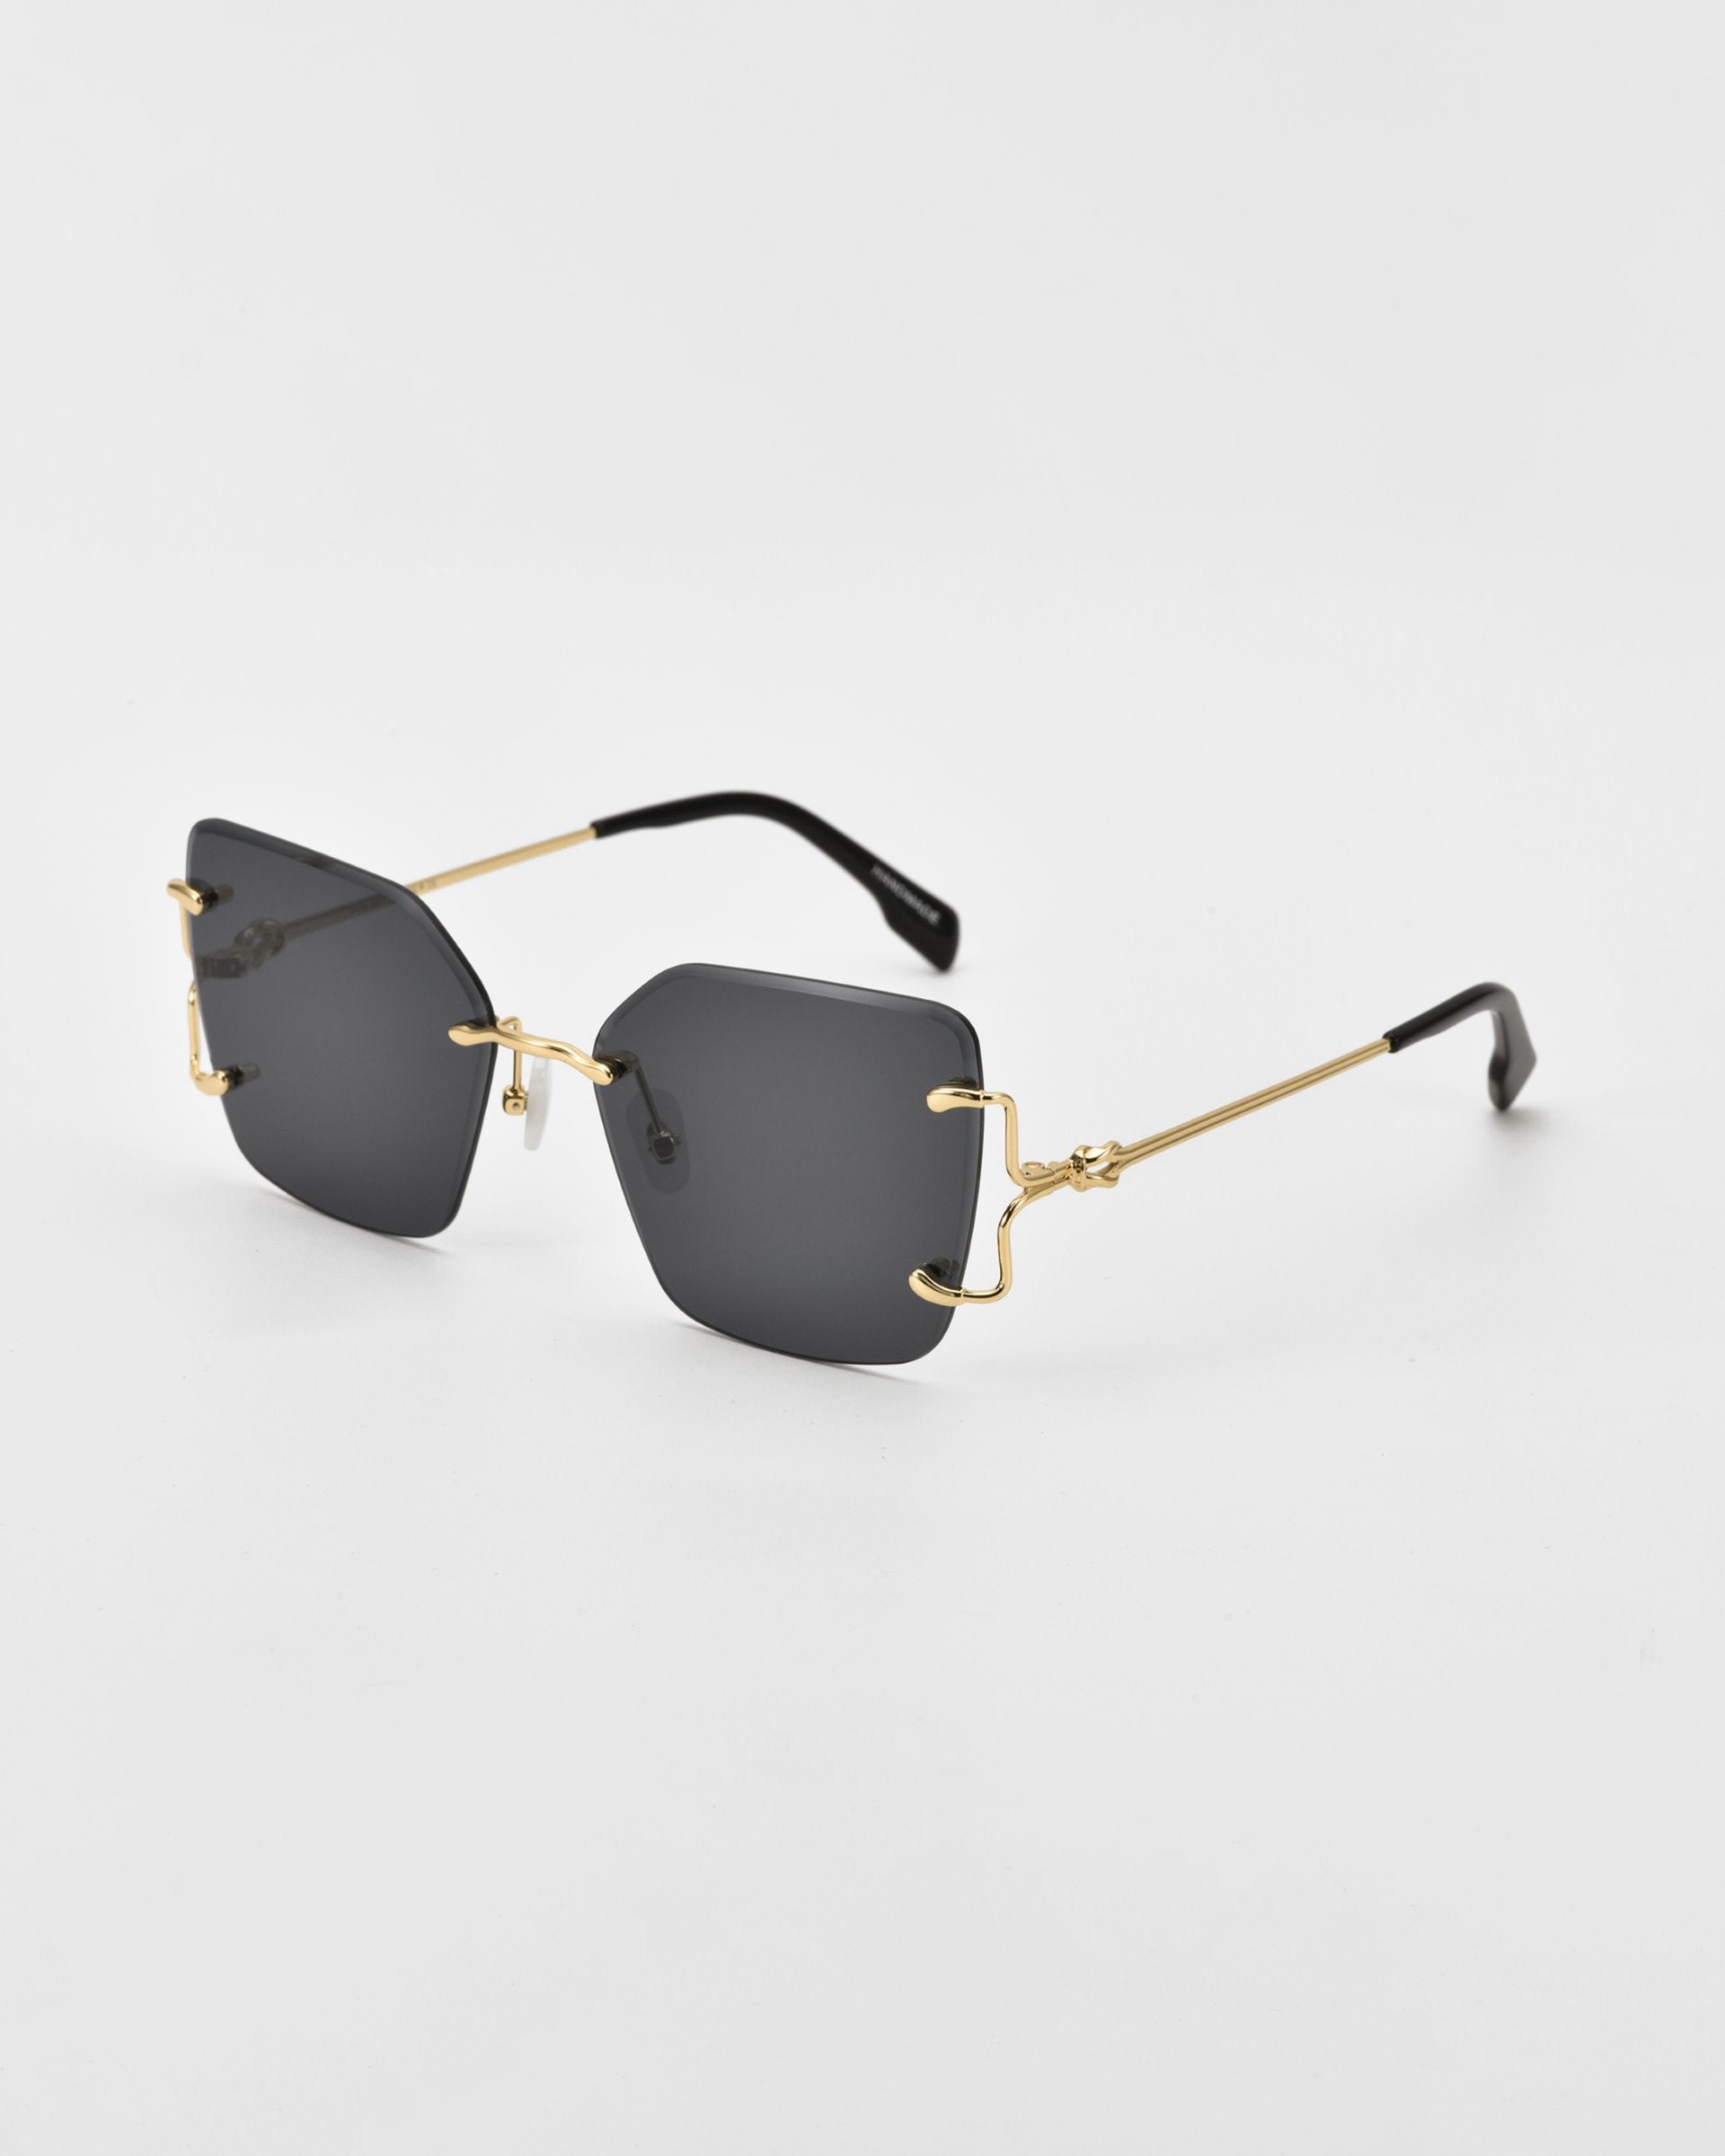 A pair of stylish For Art&#39;s Sake® Starlit sunglasses with dark, oversized square lenses and gold-tone, wireframe temples. The design is minimalistic with a modern aesthetic, featuring black temple tips and jade-stone nosepads. The background is plain white.